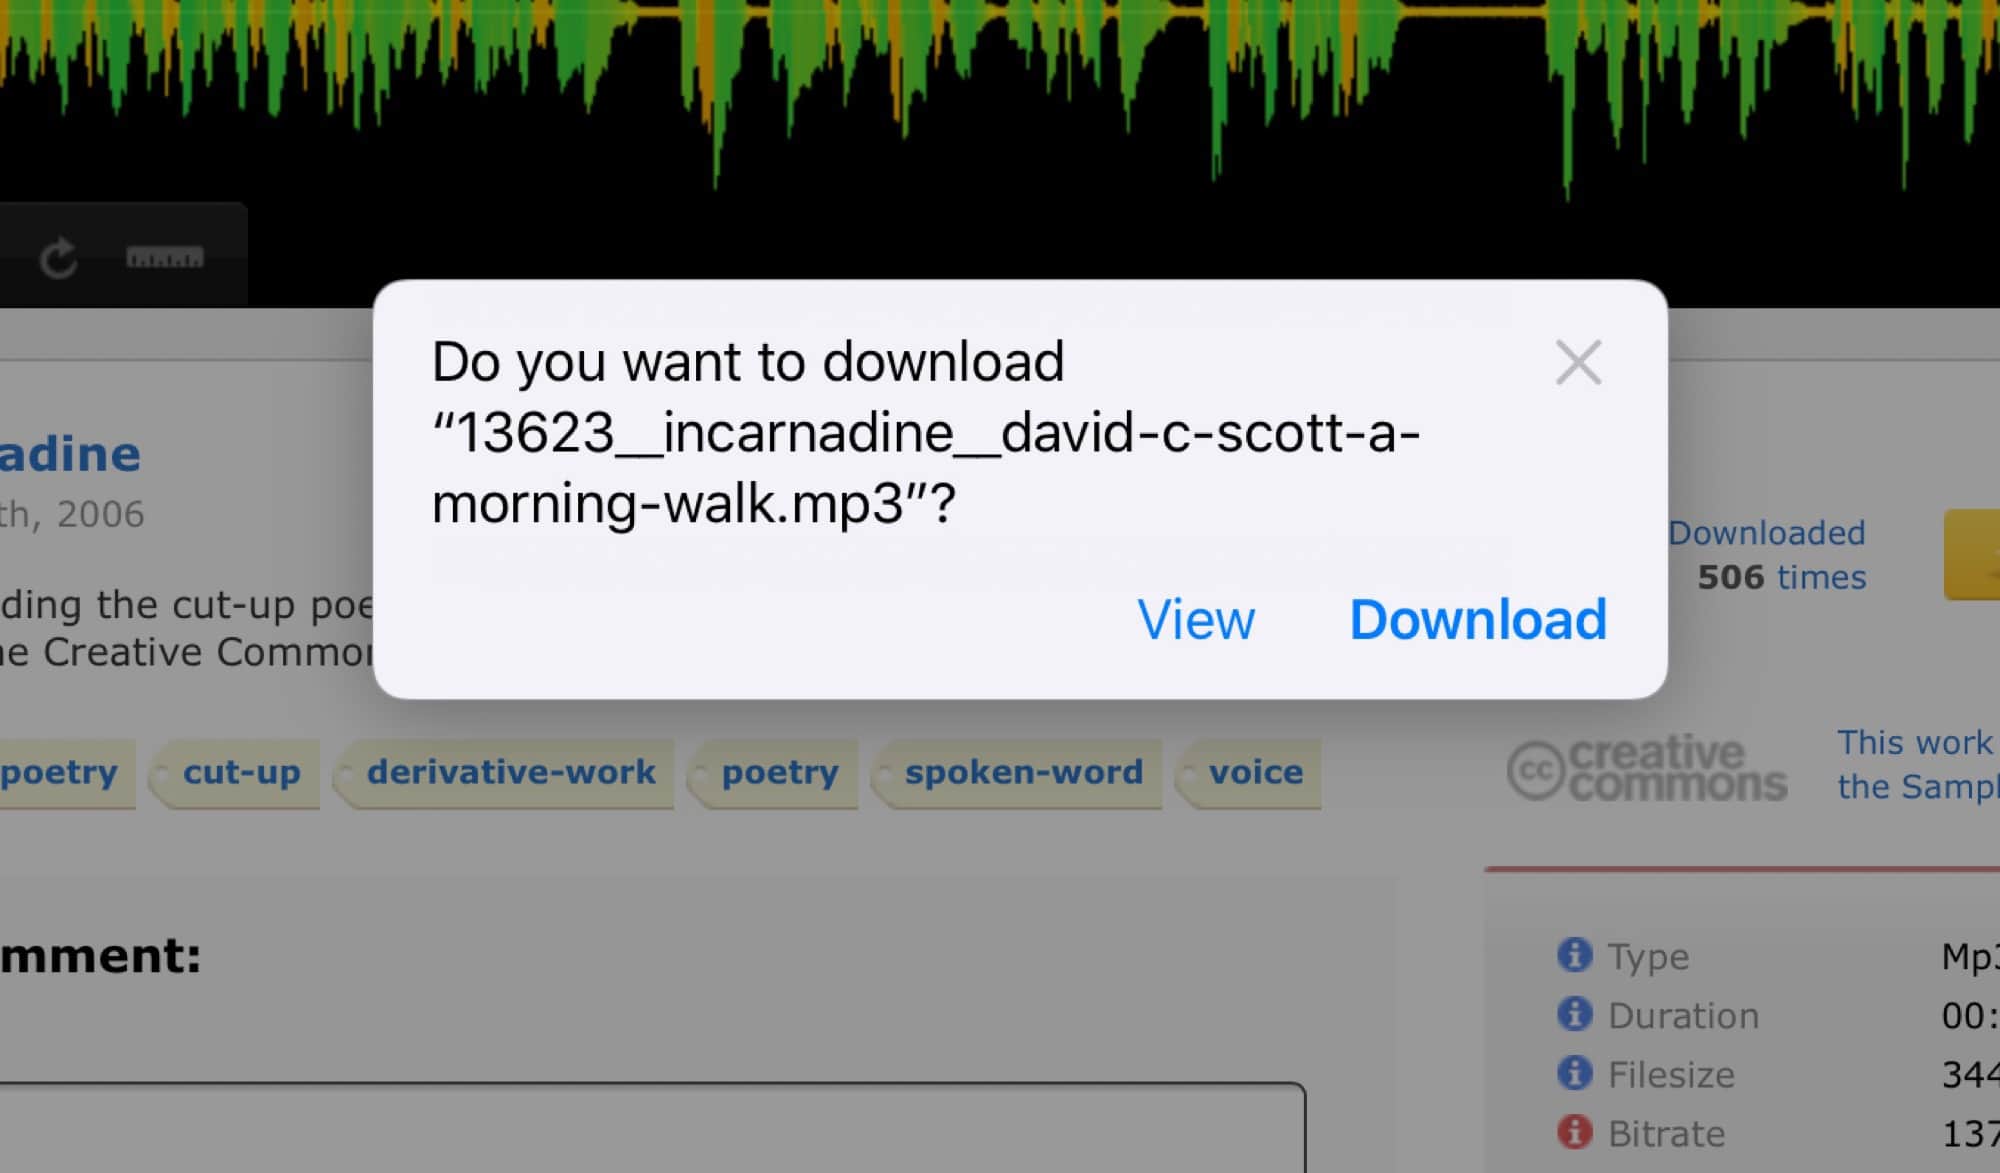 Here you can choose to 'view' or download the MP3 file.